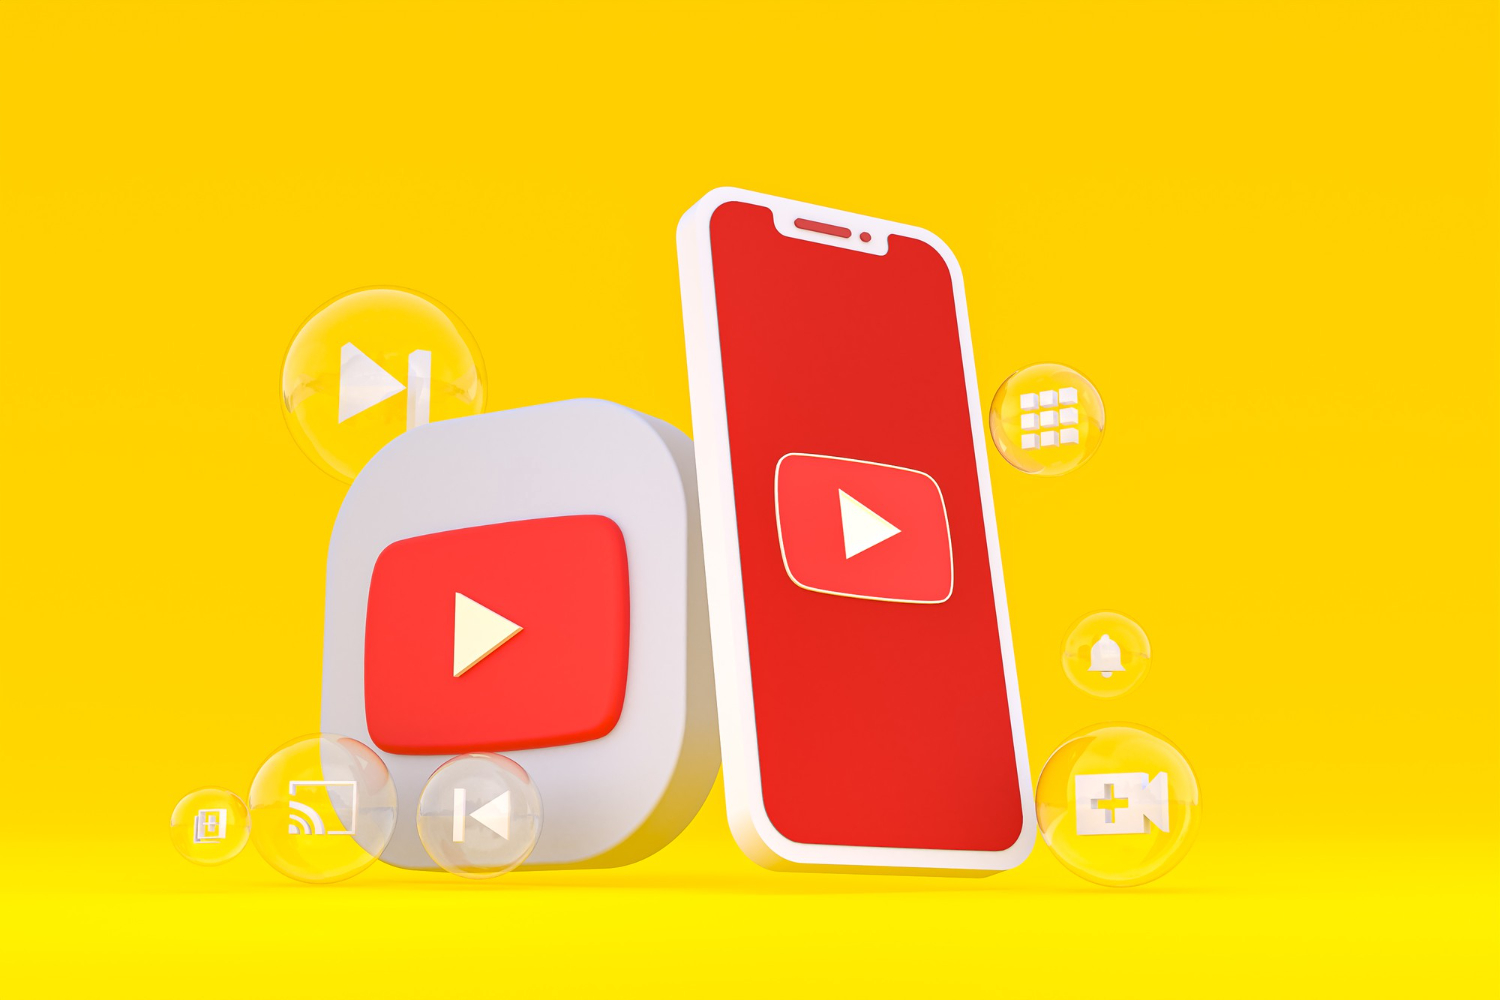 youtube-icon-screen-smartphone-mobile-phone-3d-render-yellow-background